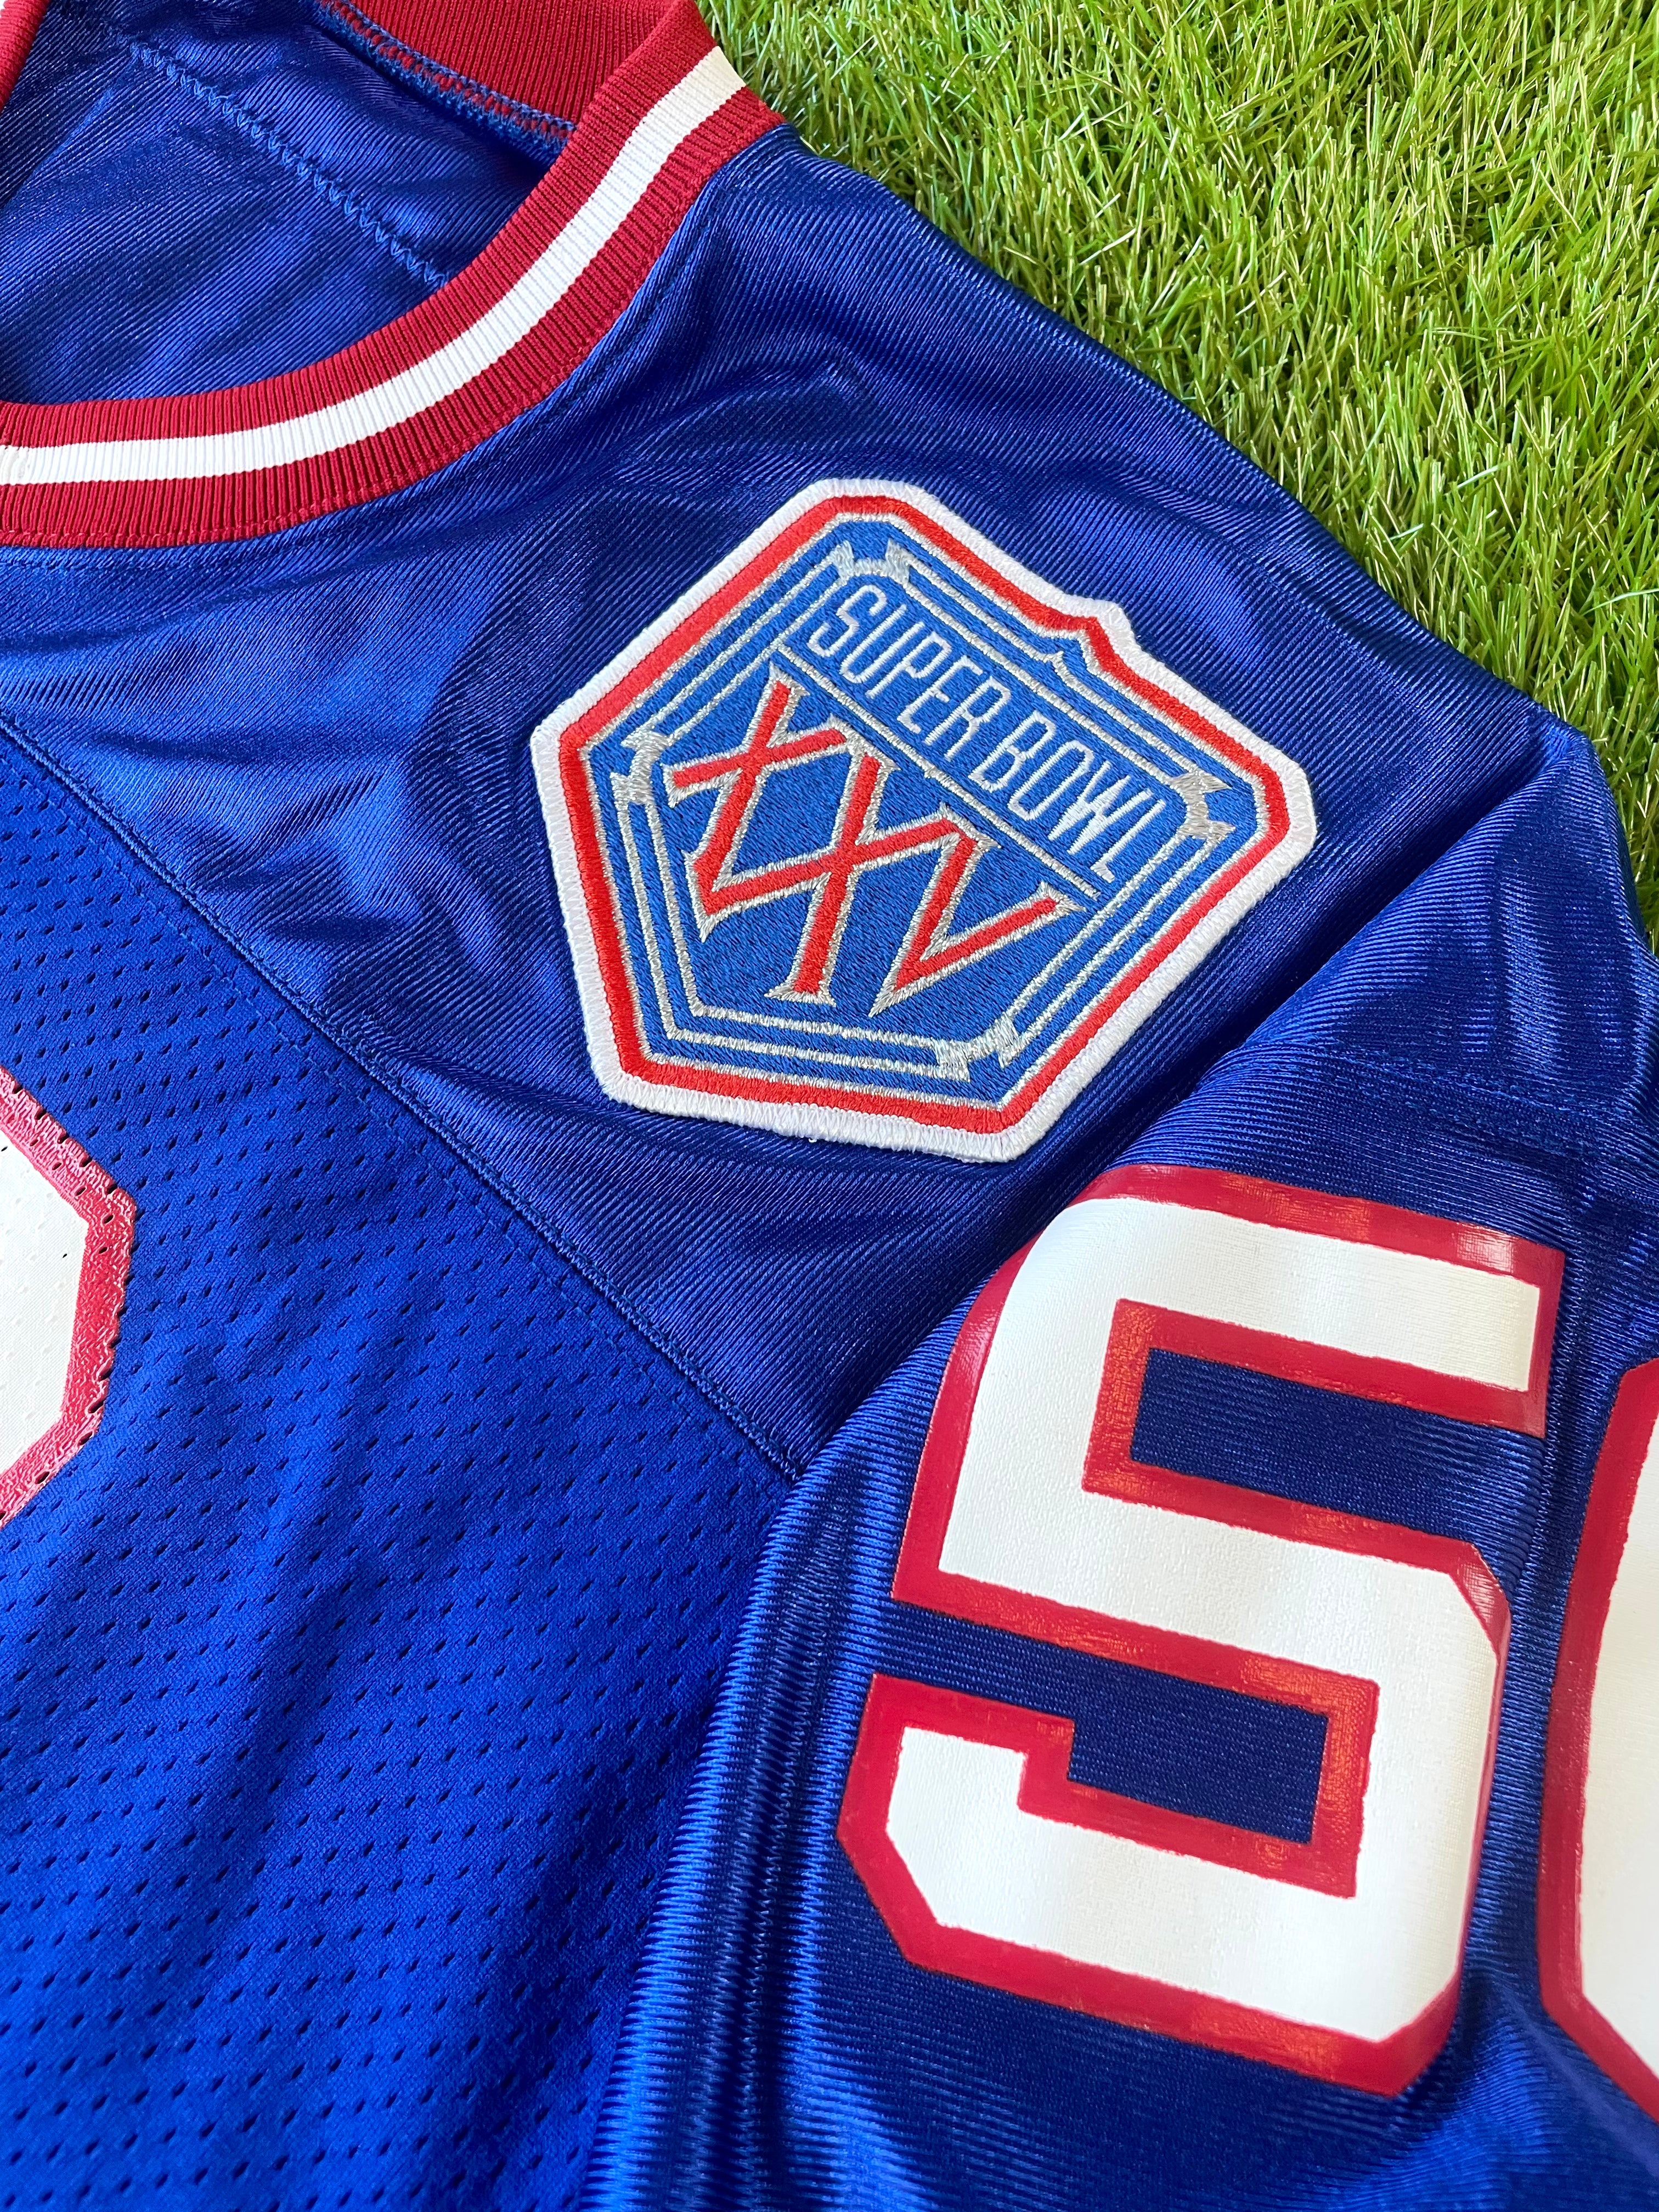 New York Giants Lawrence Taylor throwback jersey